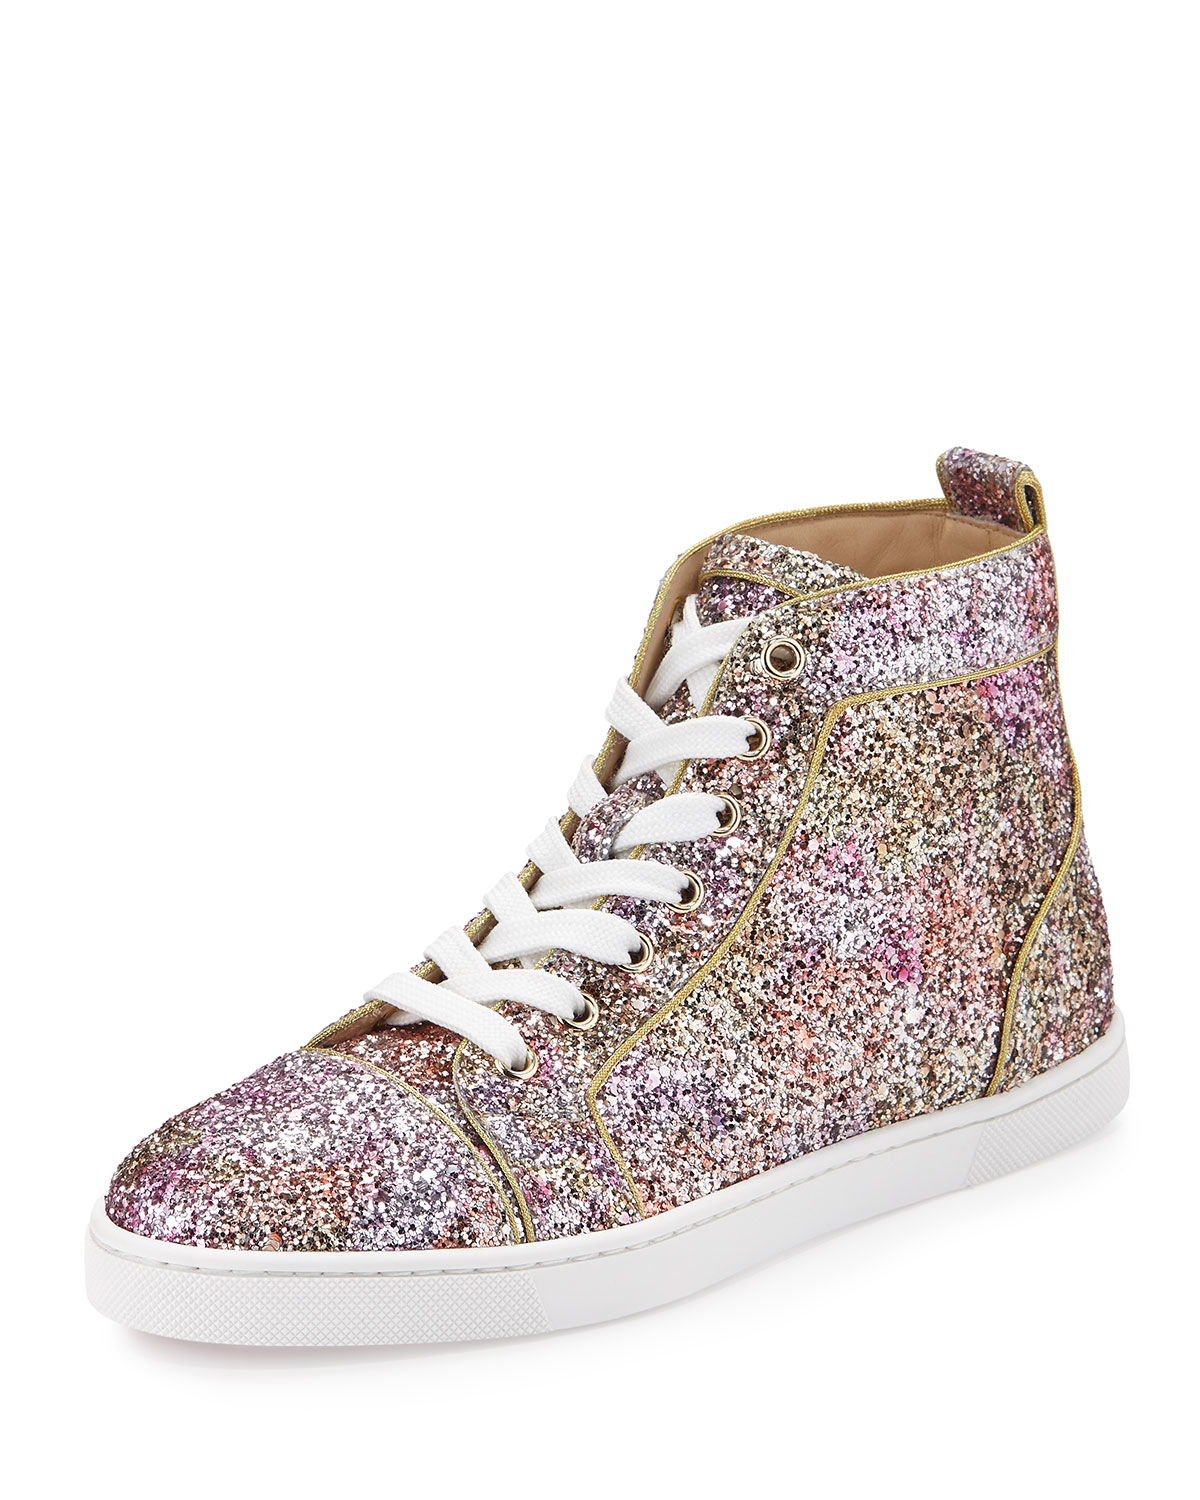 sparkly red bottom sneakers